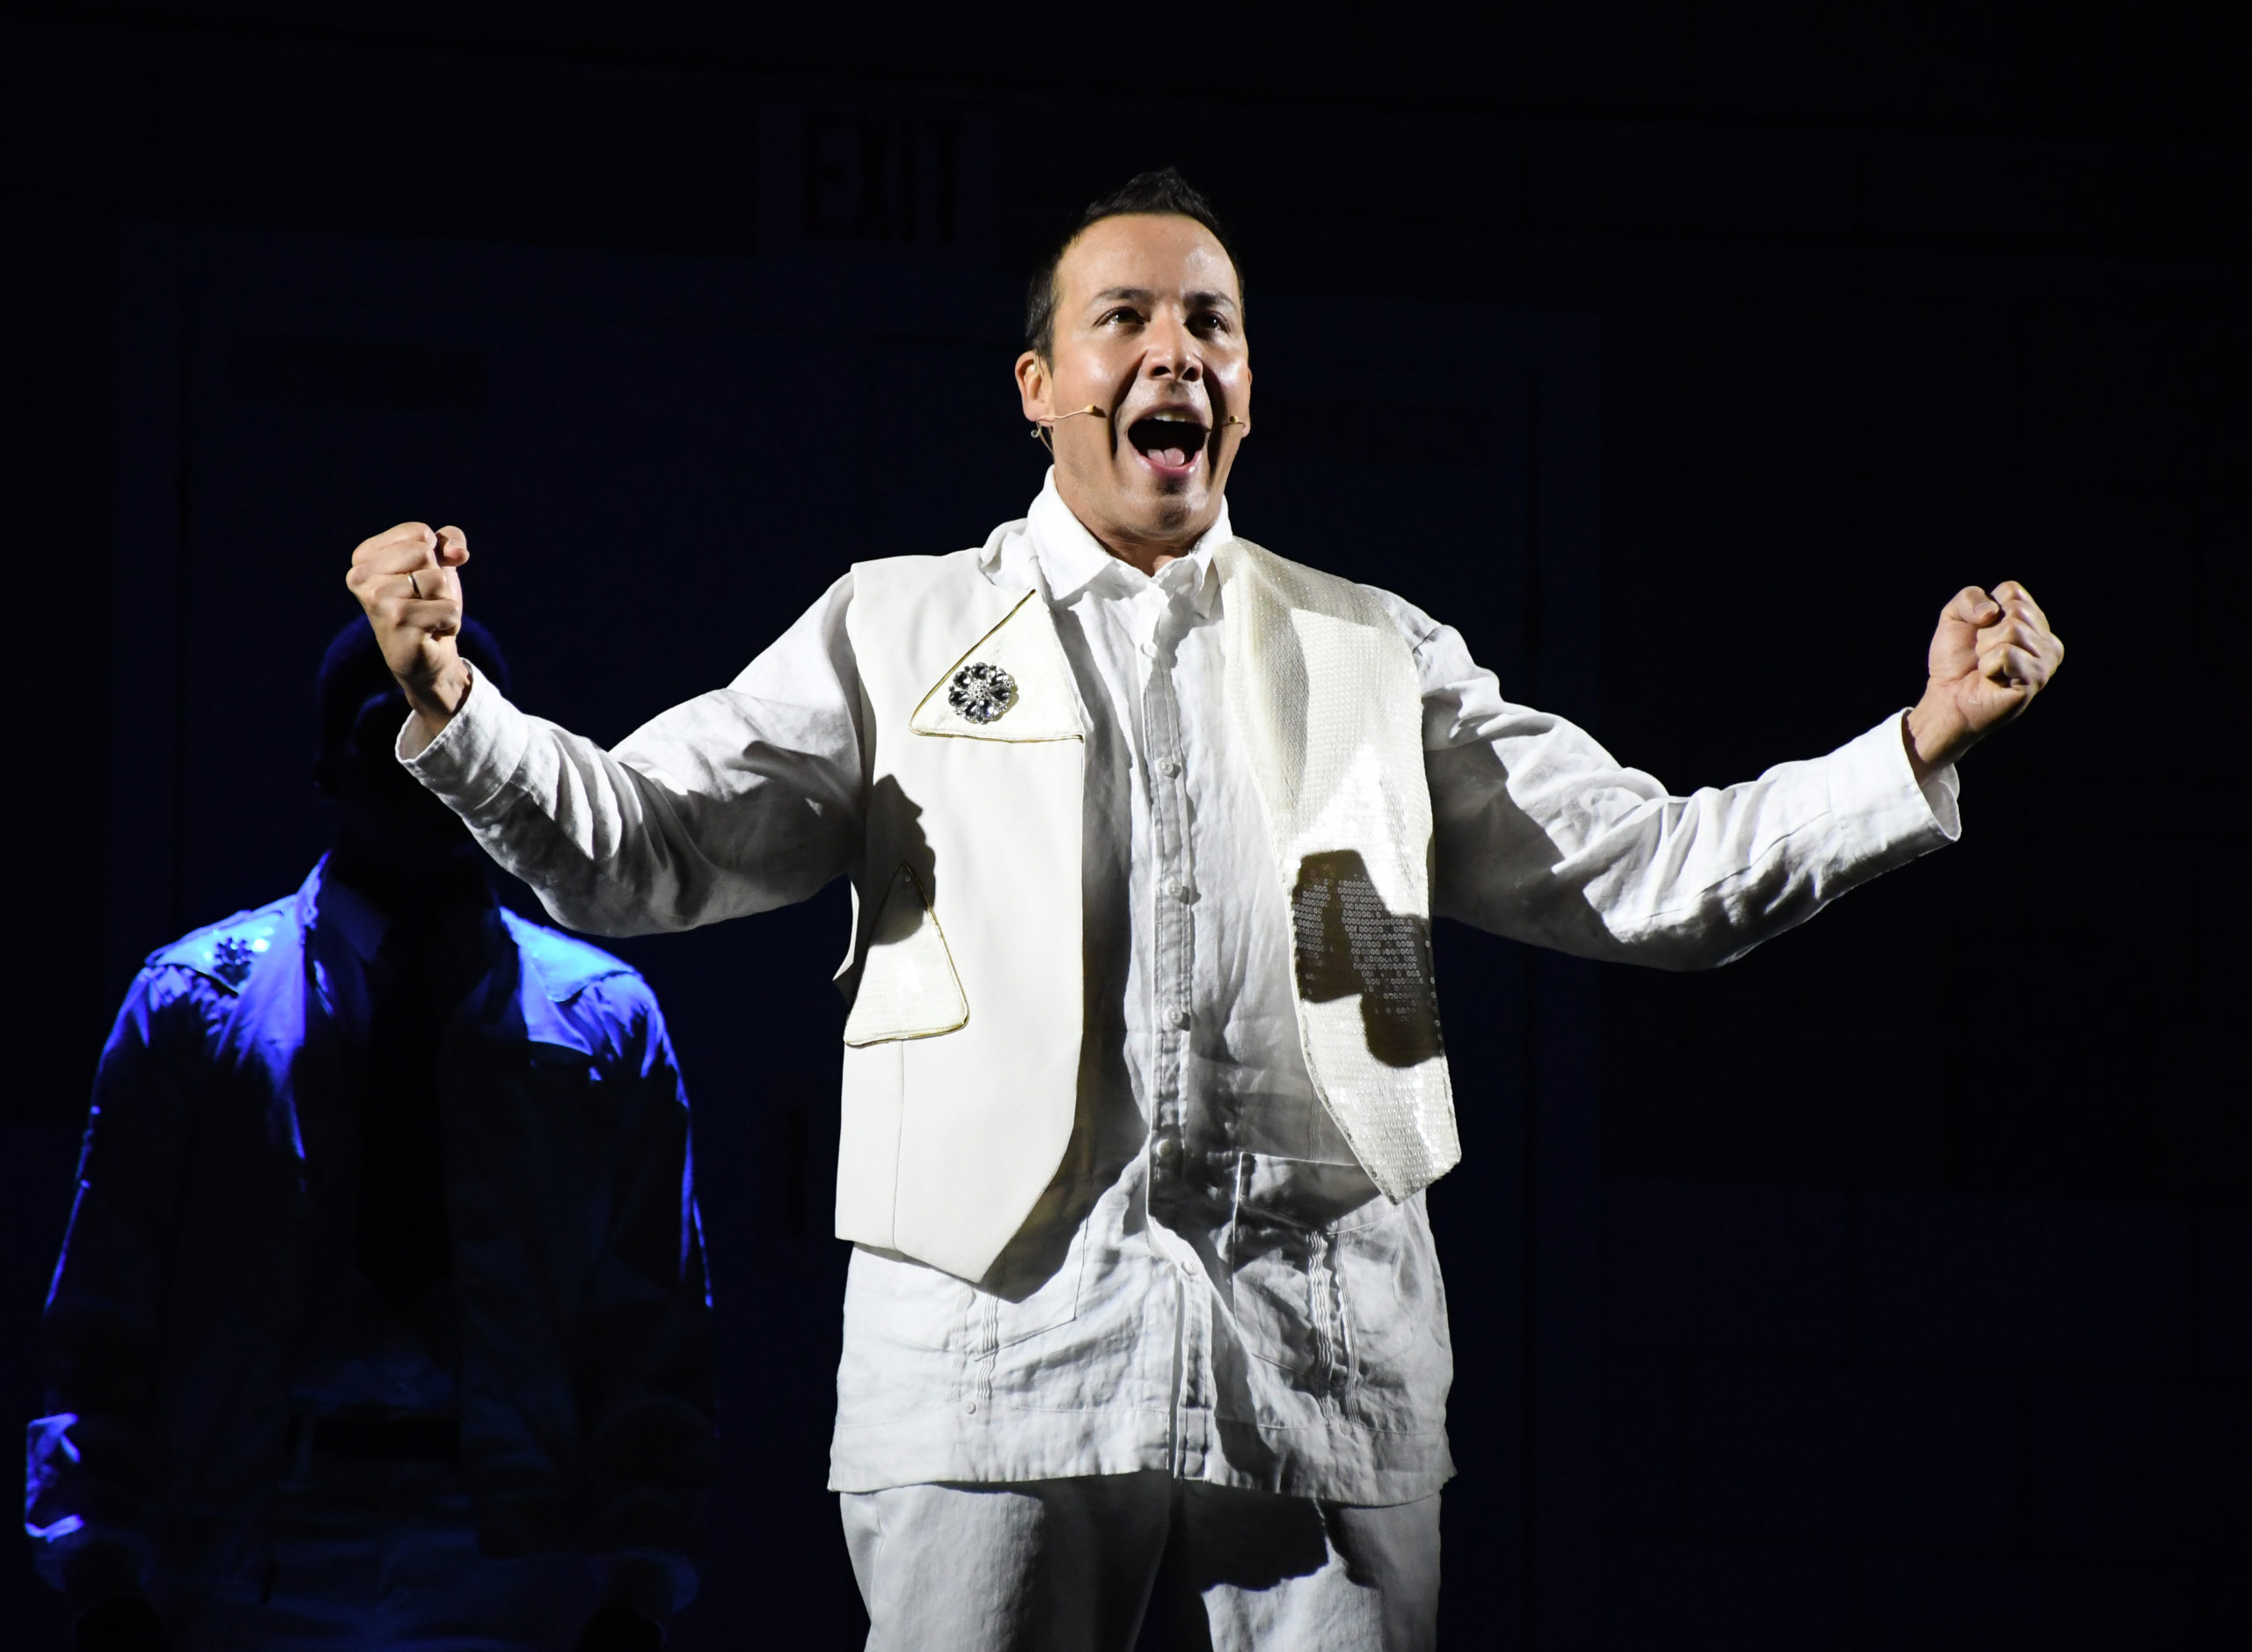 Howie Dorough sings The Me I'm Meant to Be in the world premiere of HOWIE D: BACK IN THE DAY